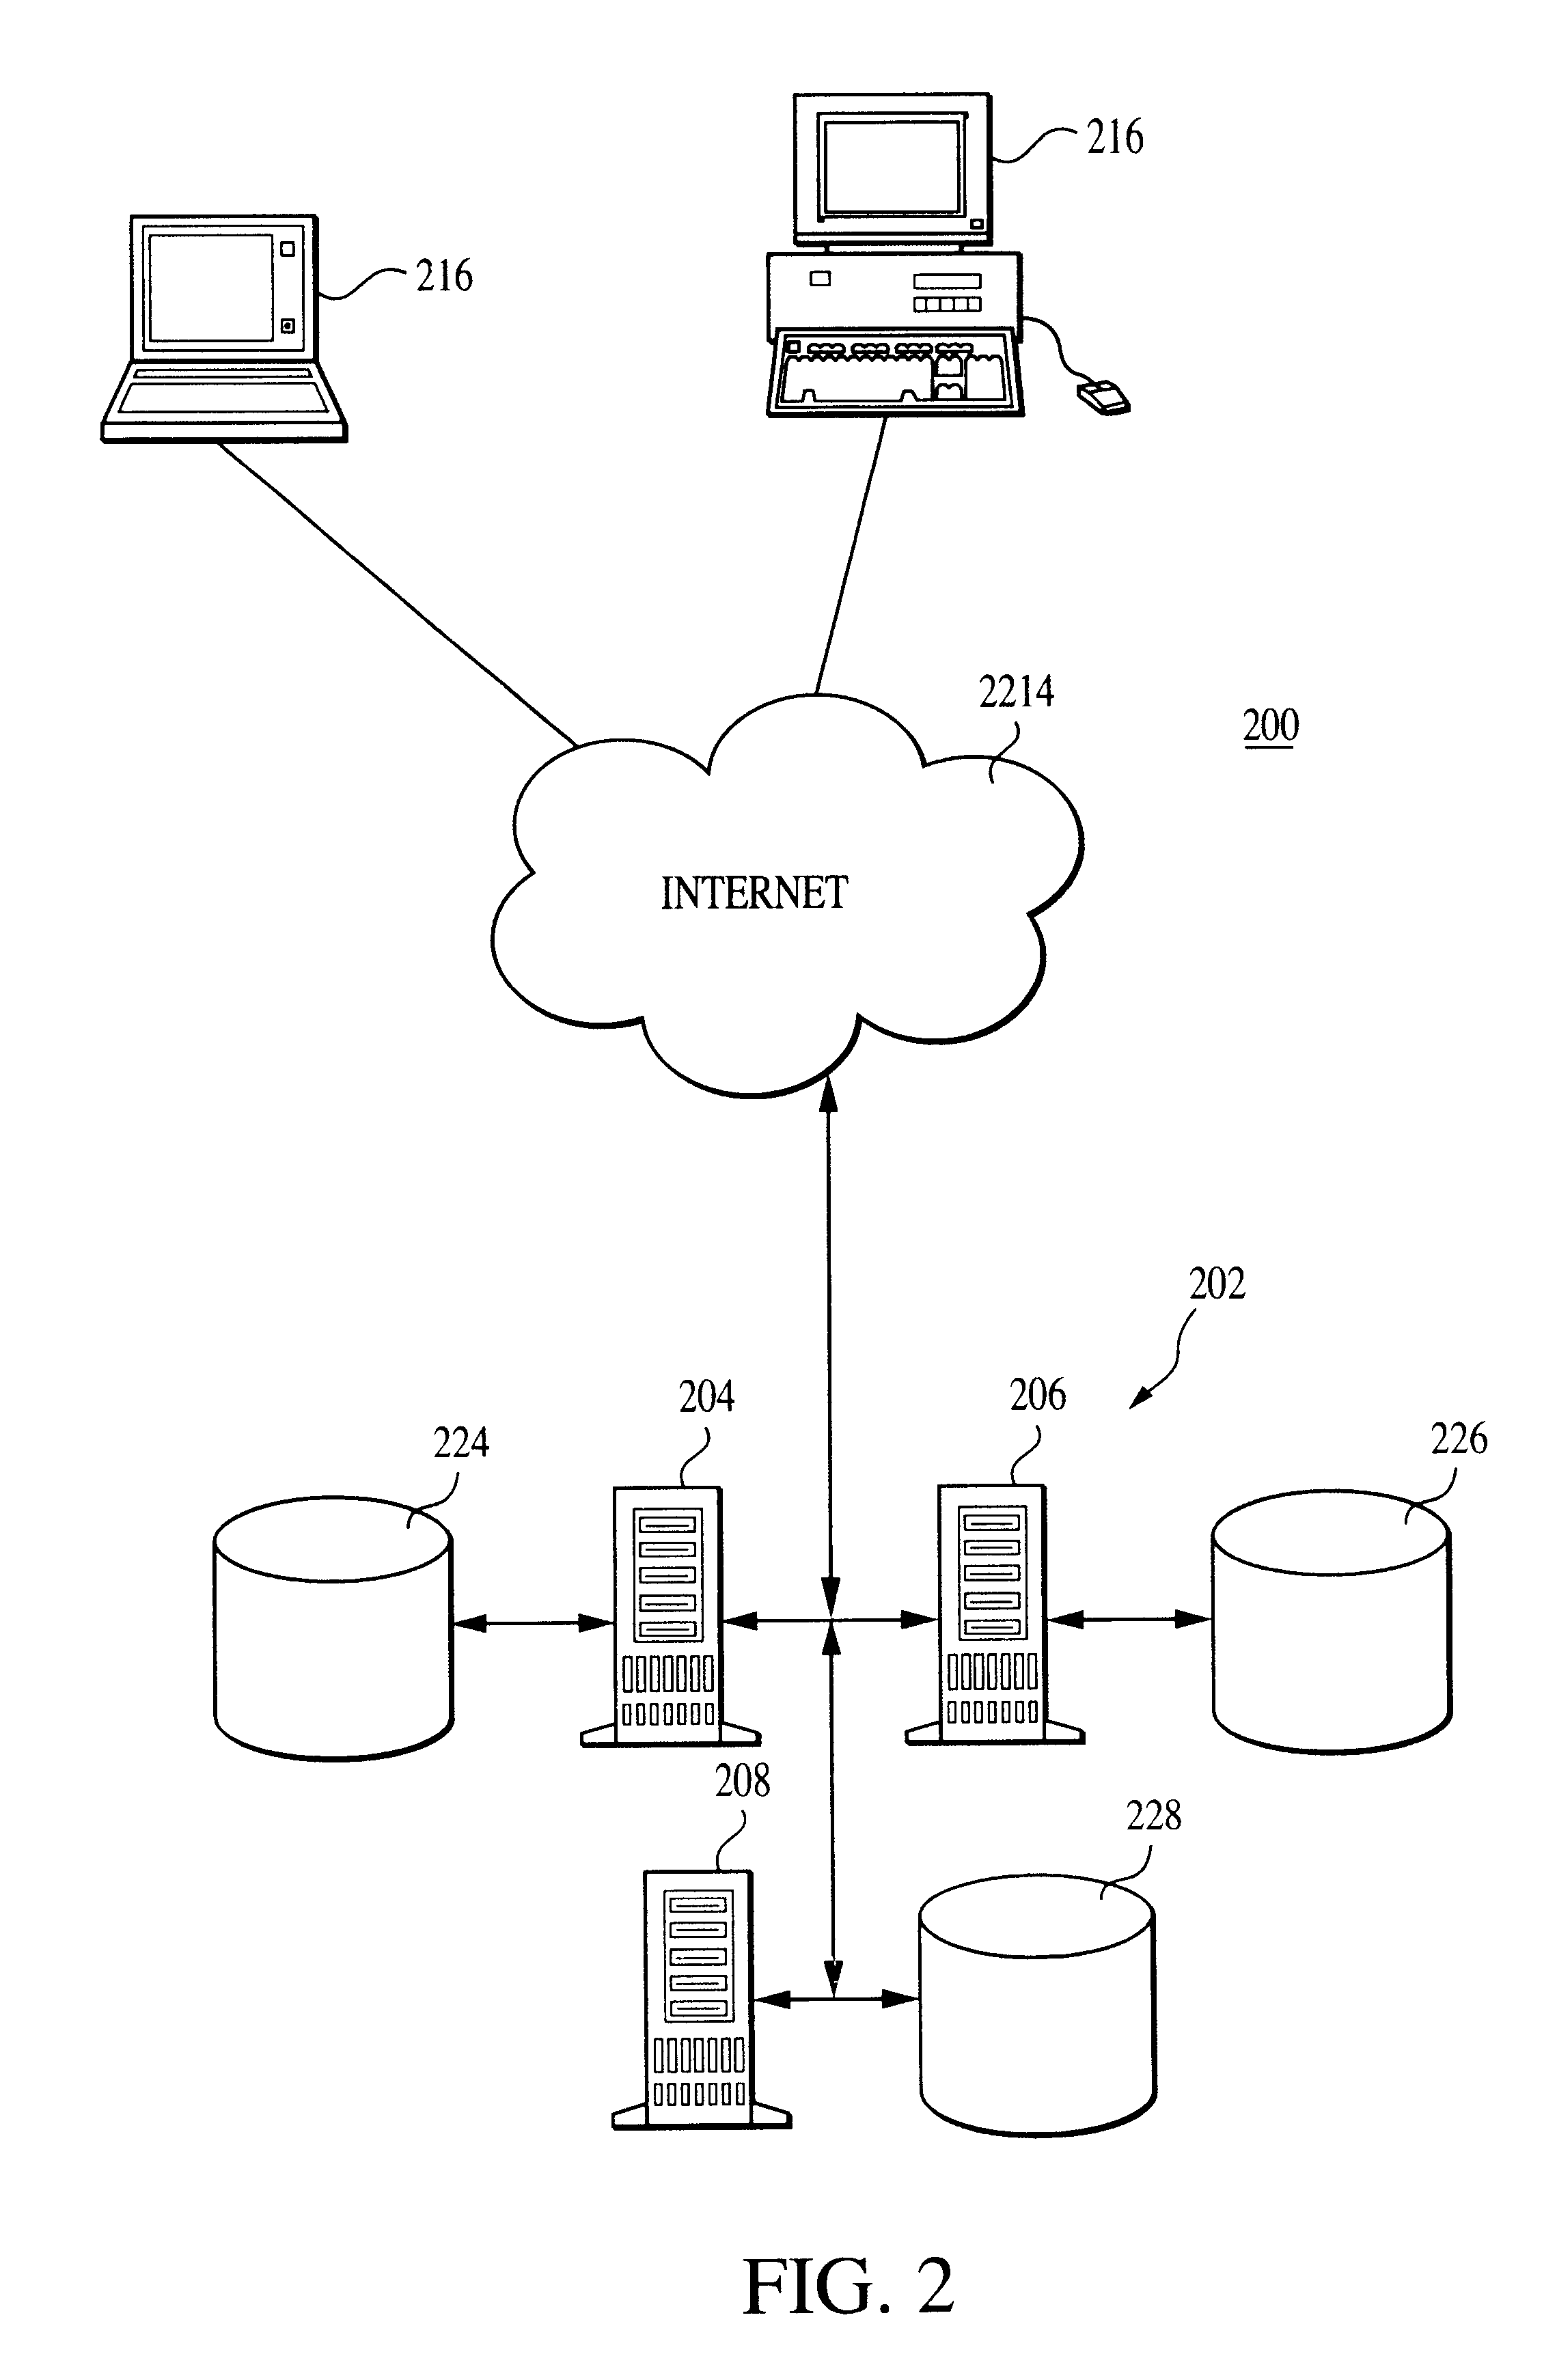 System and method allowing advertisers to manage search listings in a pay for placement search system using grouping